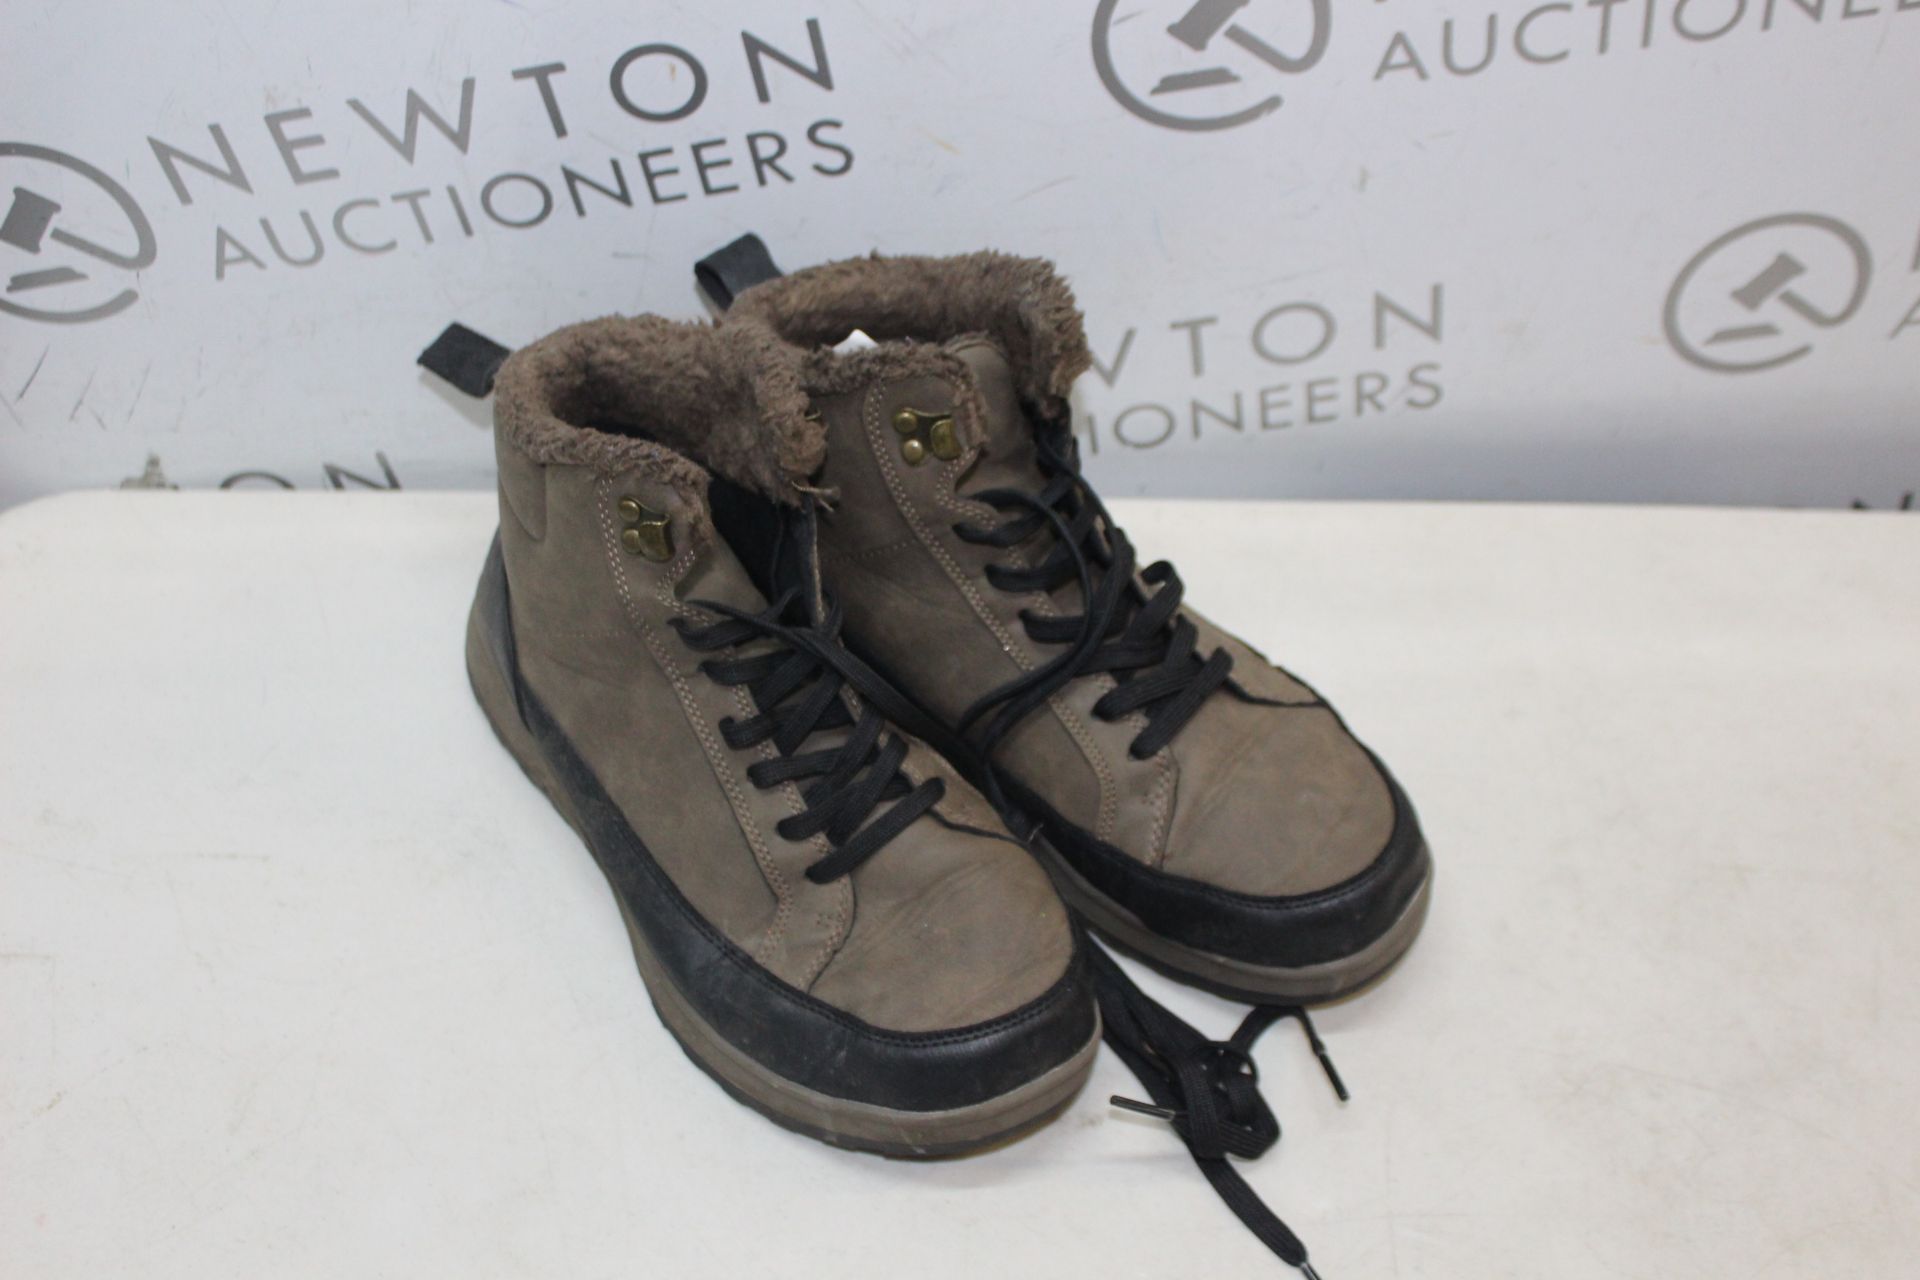 1 PAIR OF WEATHERPROOF BOOTS UK SIZE 8 RRP Â£39